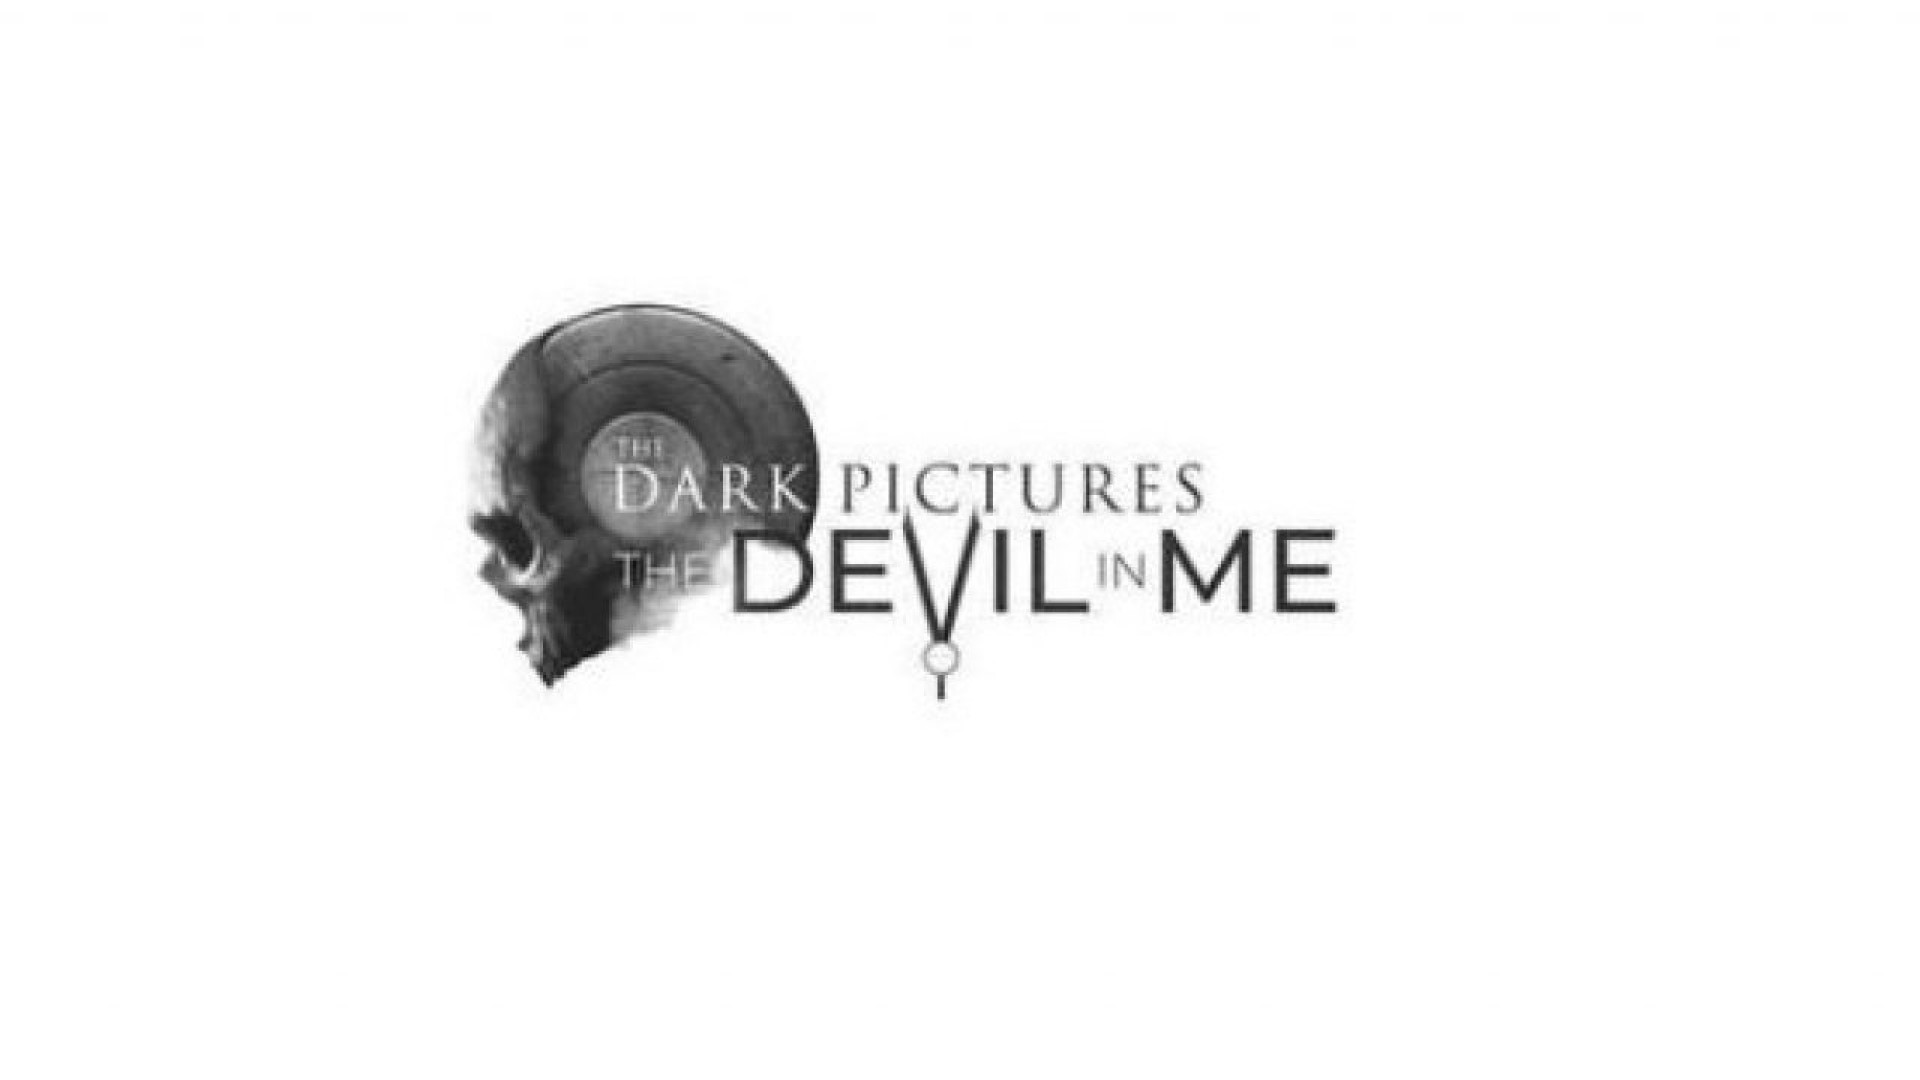 The Dark Pictures Anthology's Next Game is Called The Devil in Me,  According to a Trademark